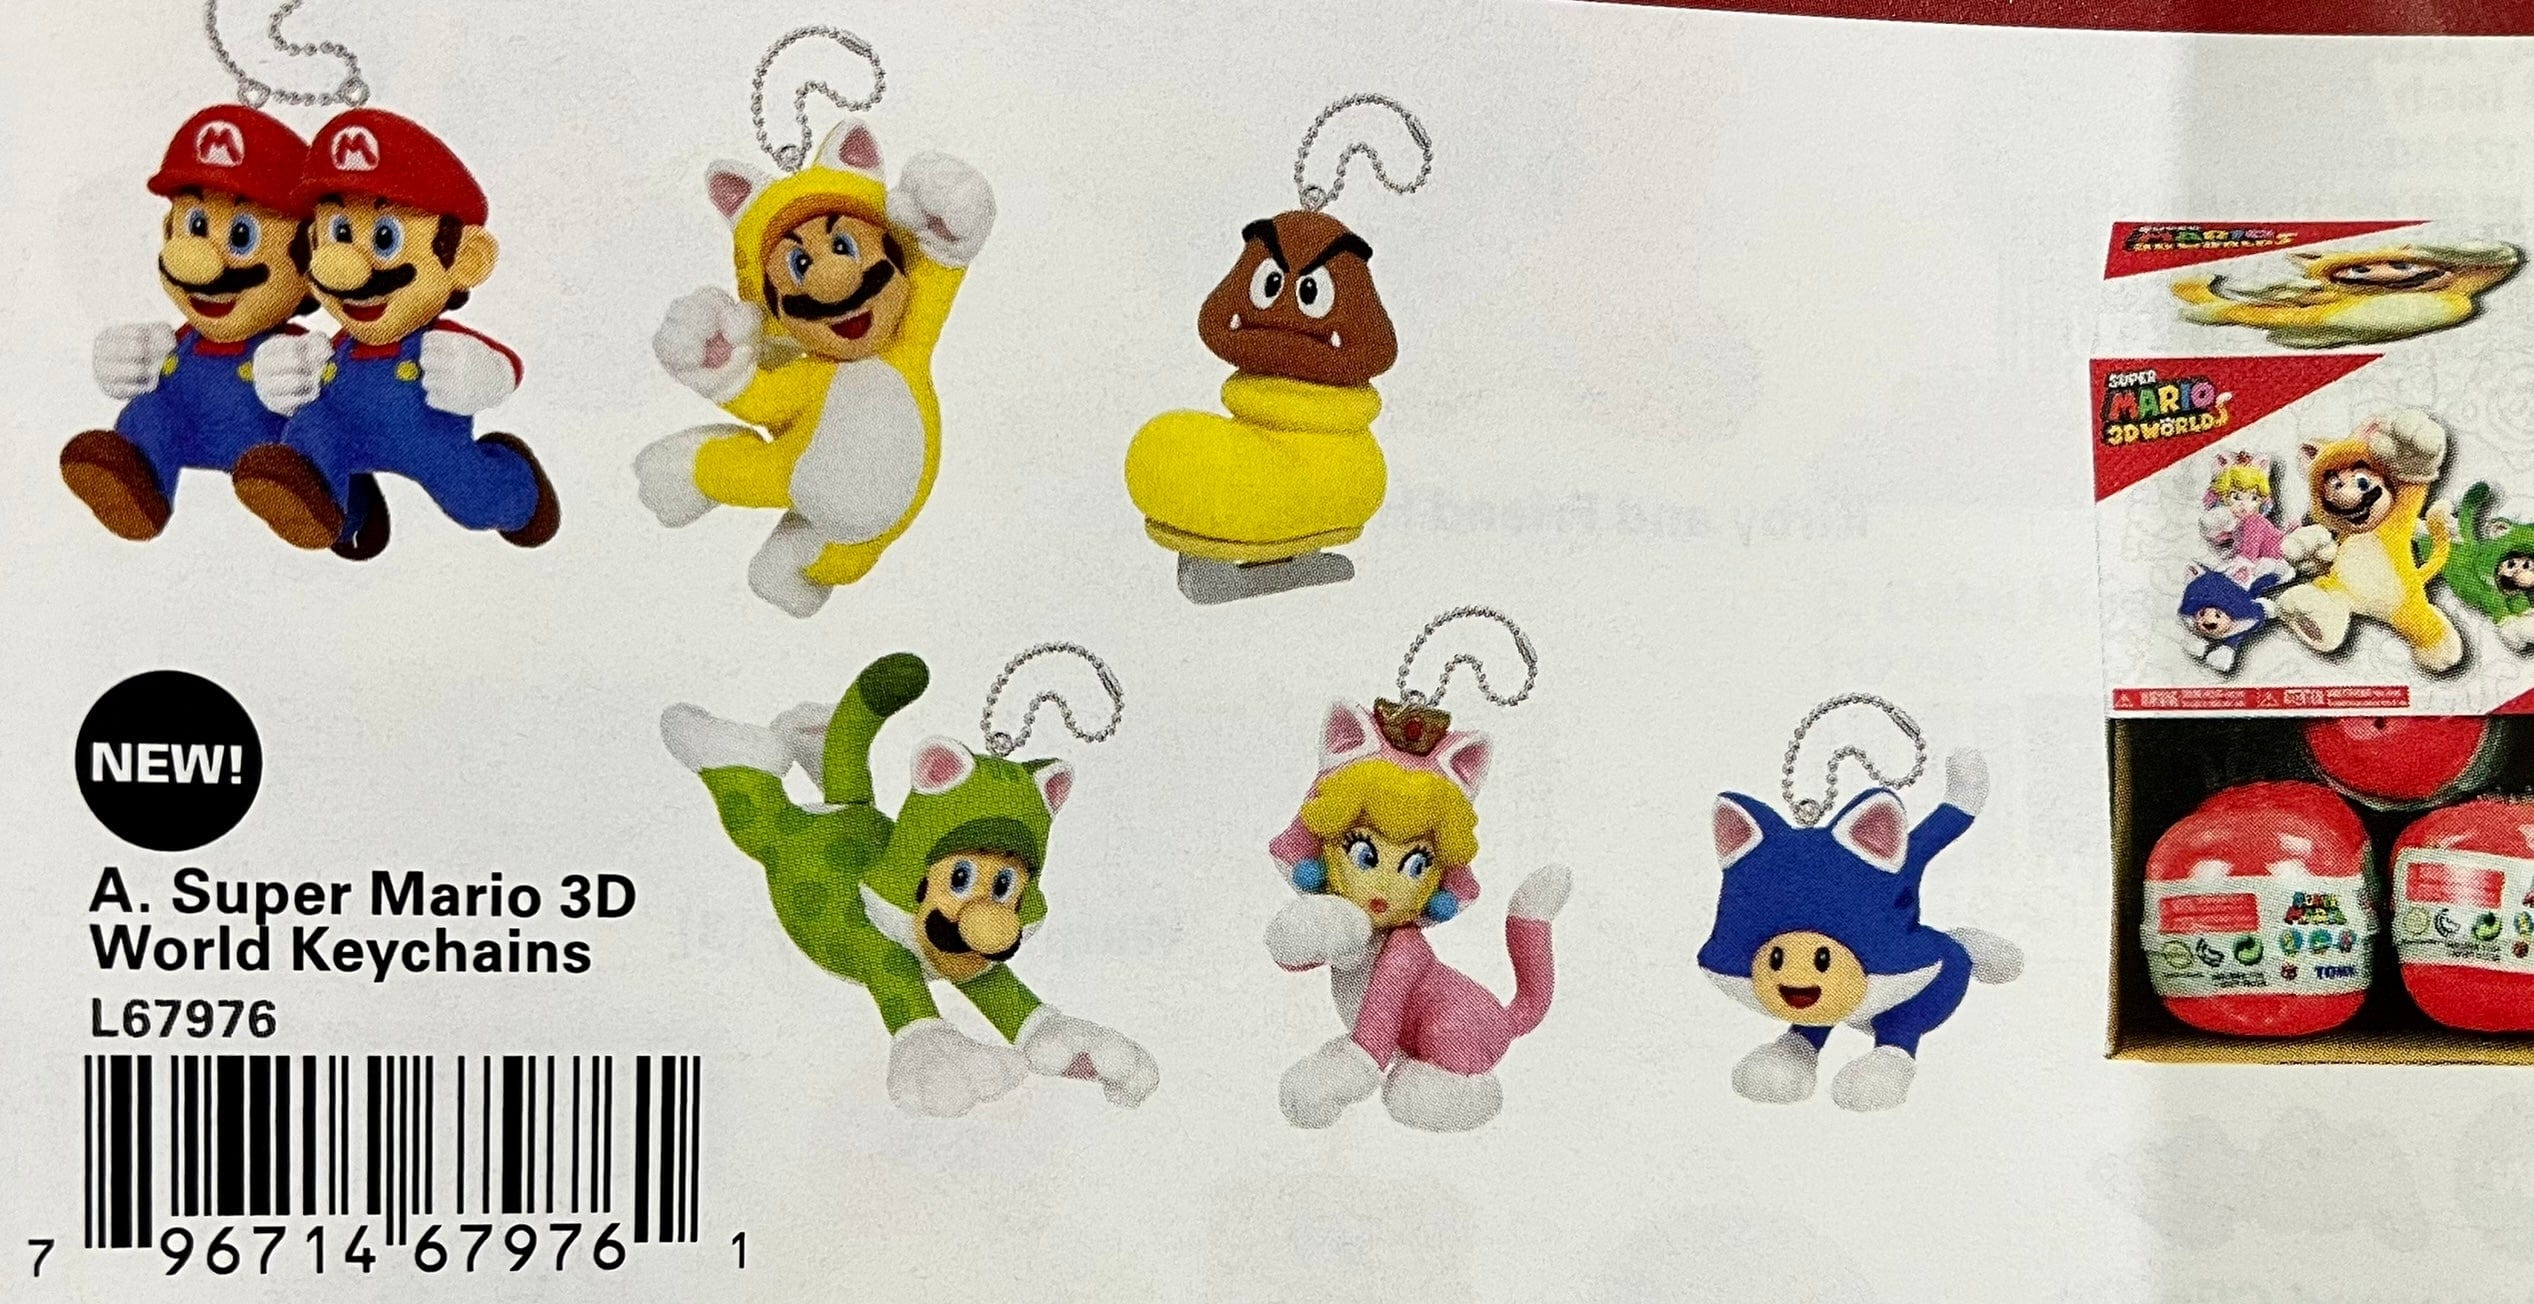 TOMY Super Mario 3D World Keychains Surprise Gachapon Capsule Toy Kawaii Gifts 796714679761